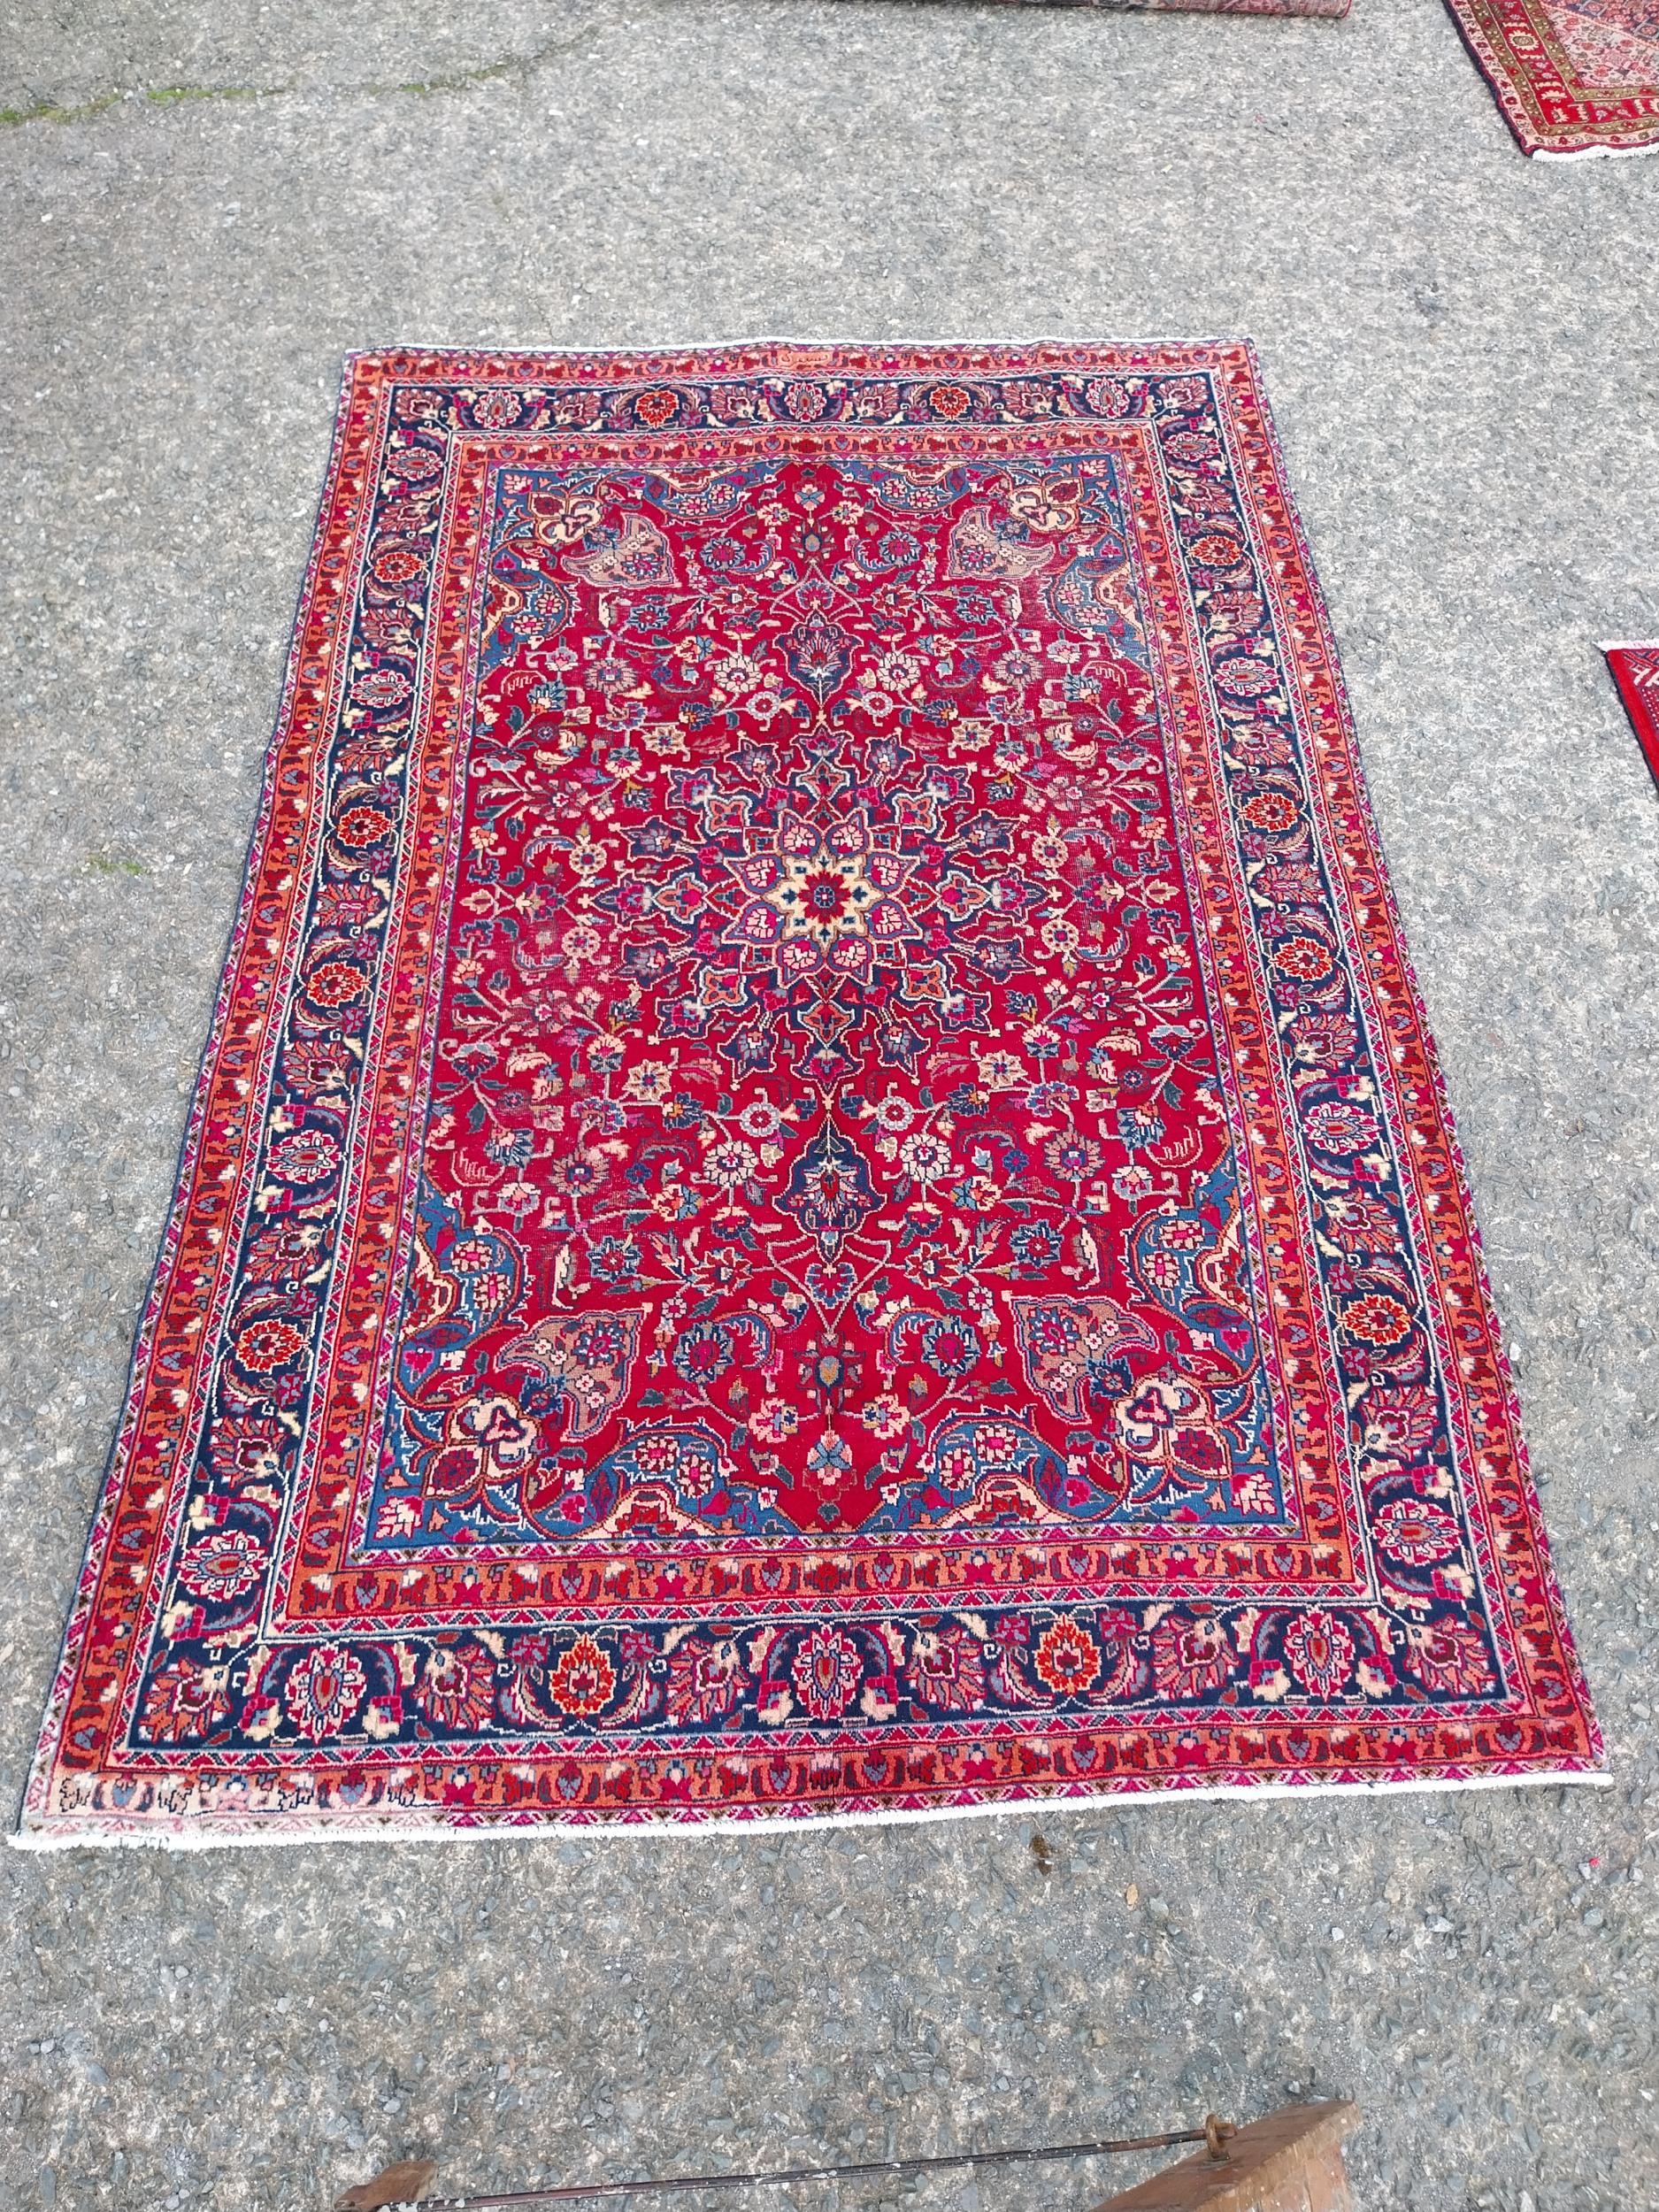 Good quality decorative Persian carpet square {300cm W x 209cm L} (not available to view in